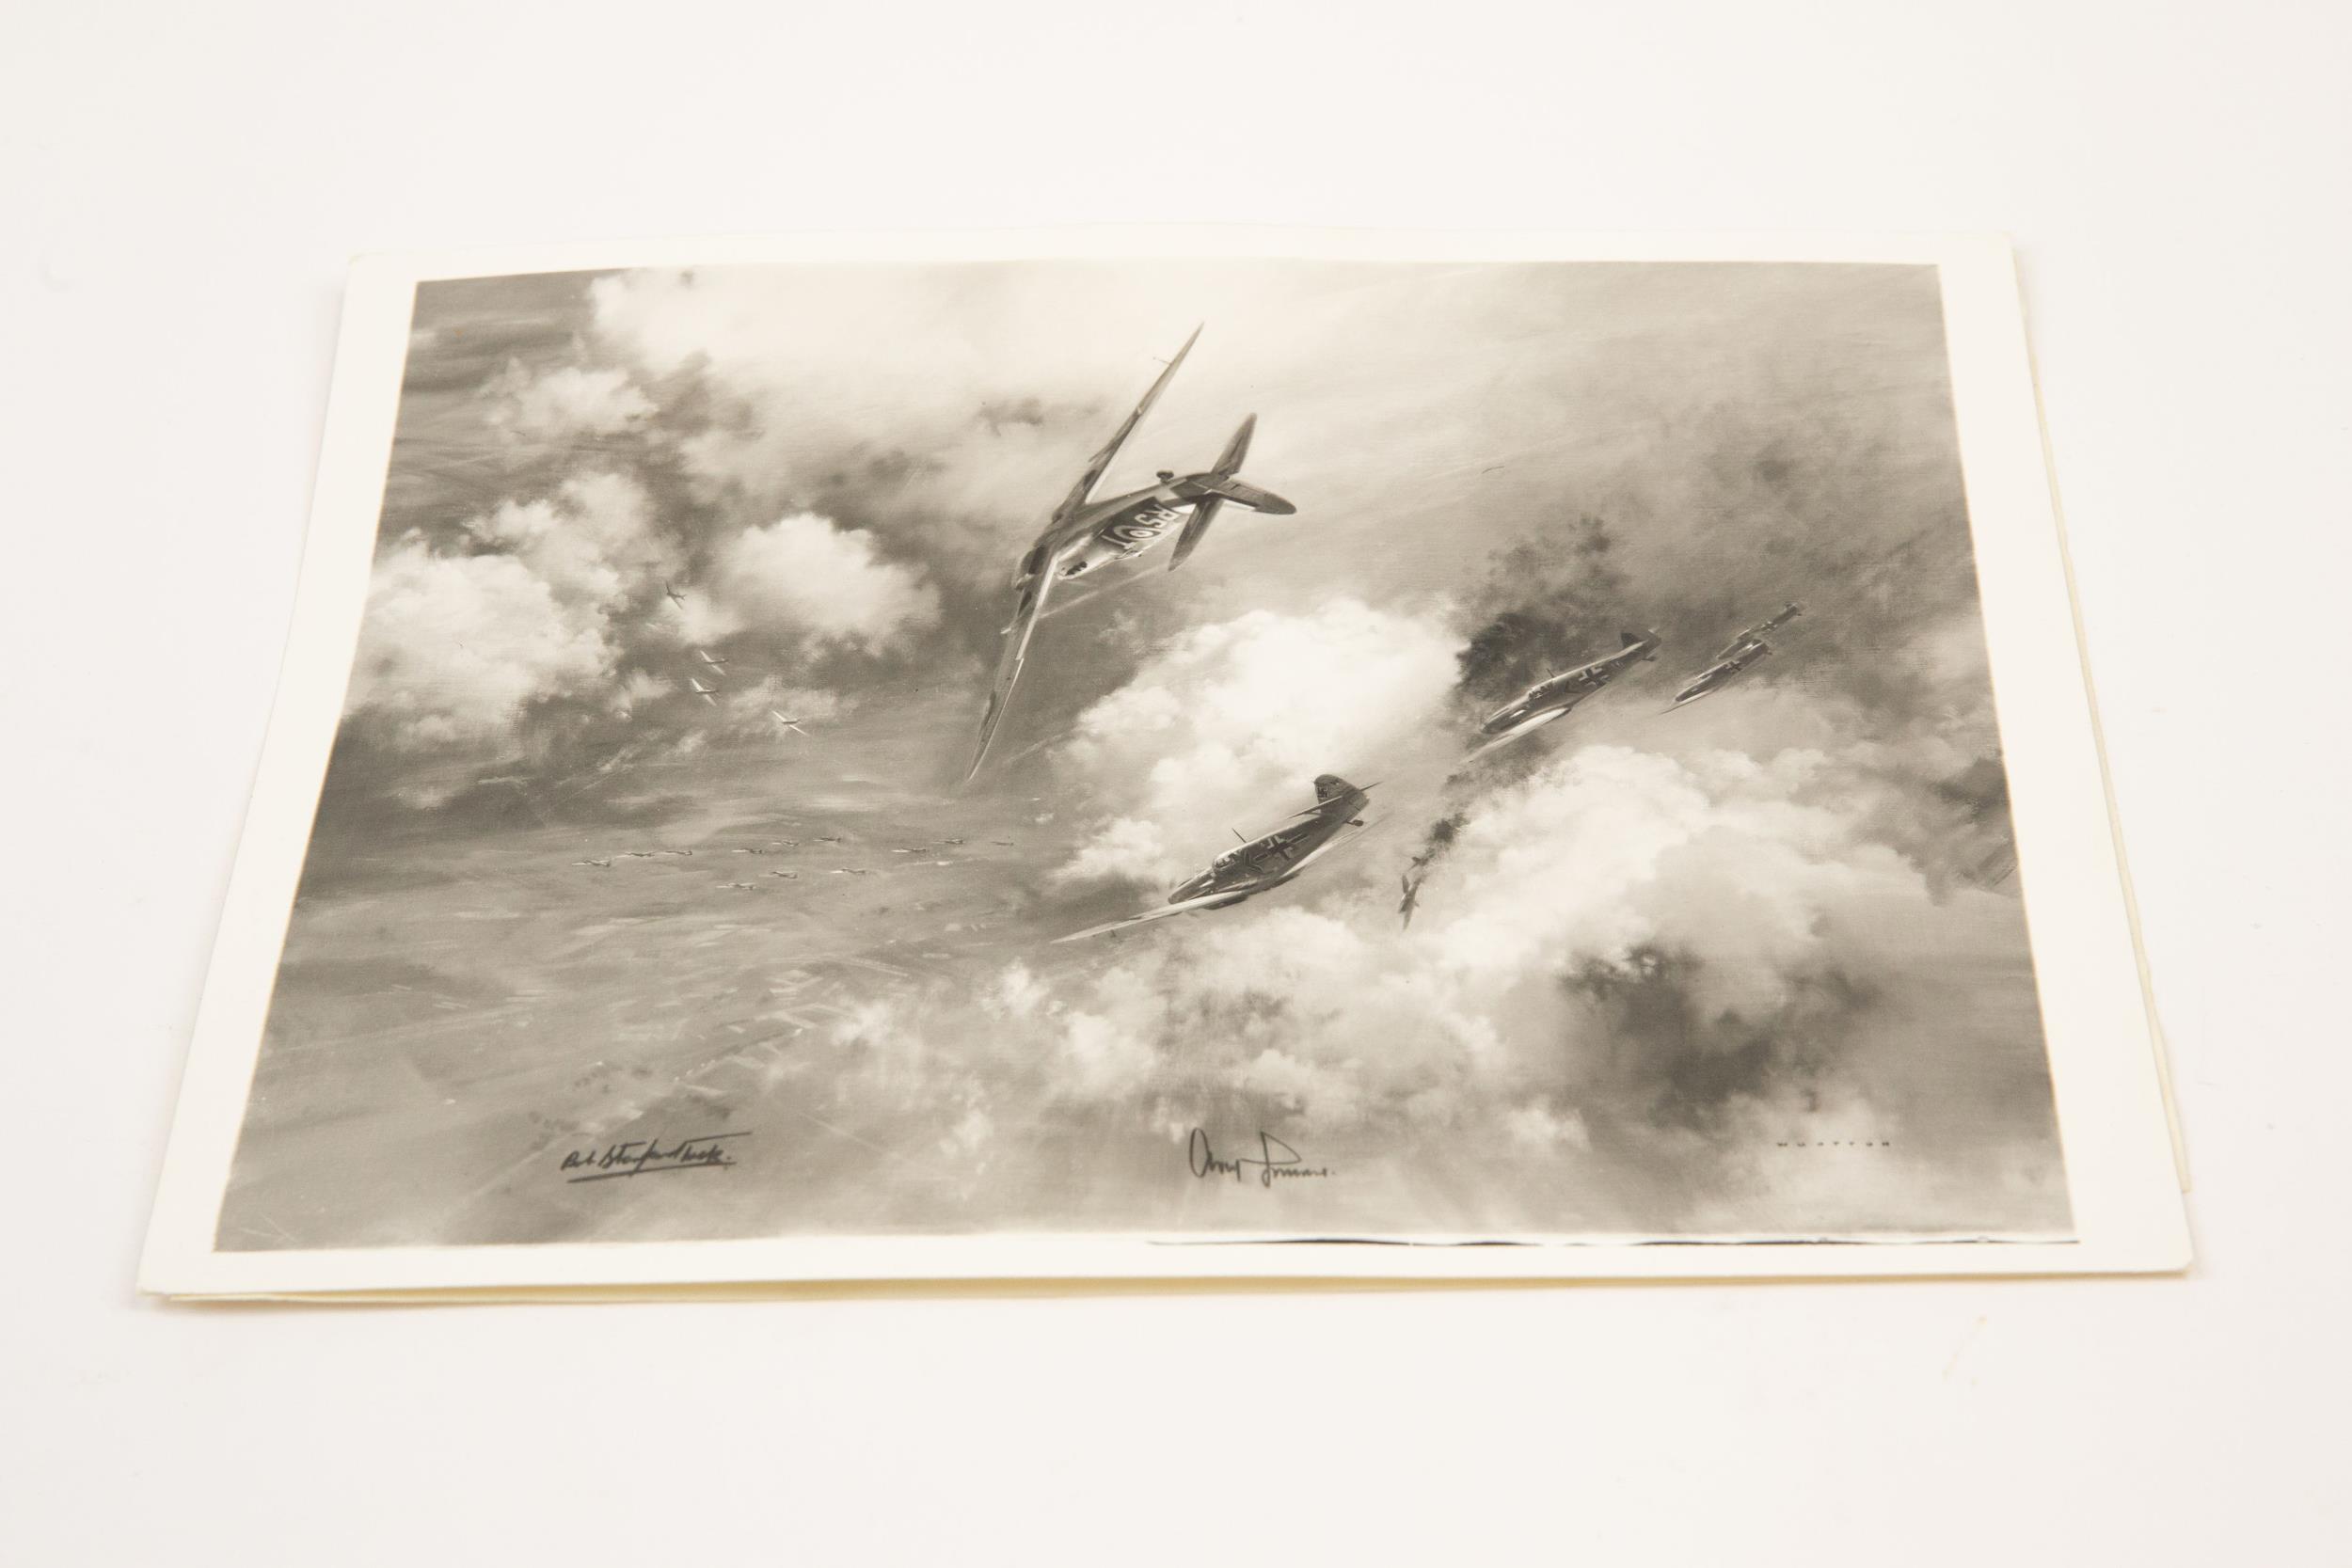 A photograph of an original painting by Frank Wootton entitled "Achtung Spitfire", of a Spitfire